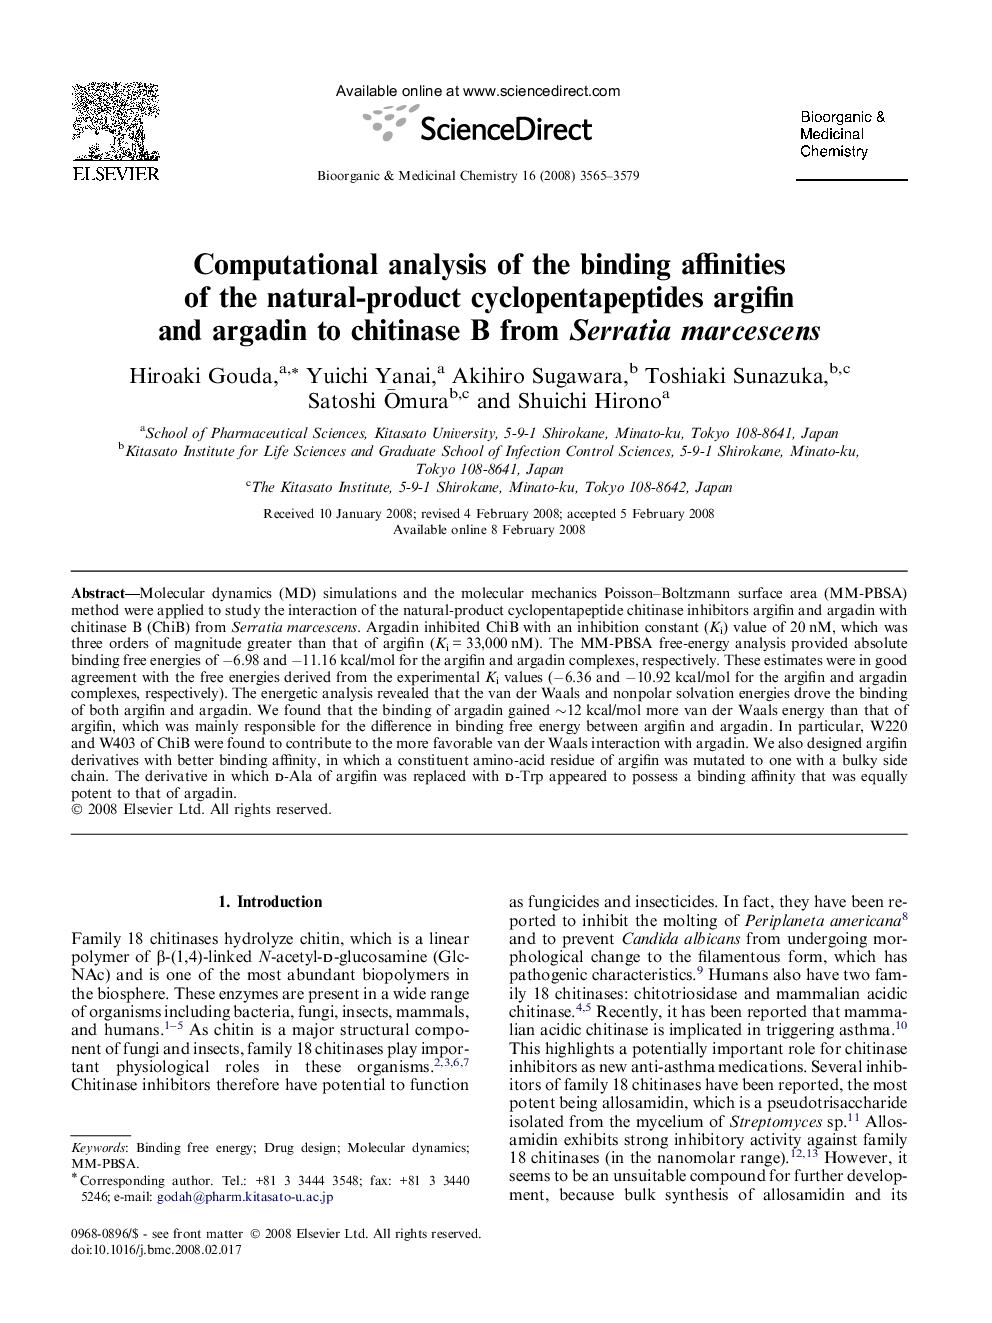 Computational analysis of the binding affinities of the natural-product cyclopentapeptides argifin and argadin to chitinase B from Serratia marcescens